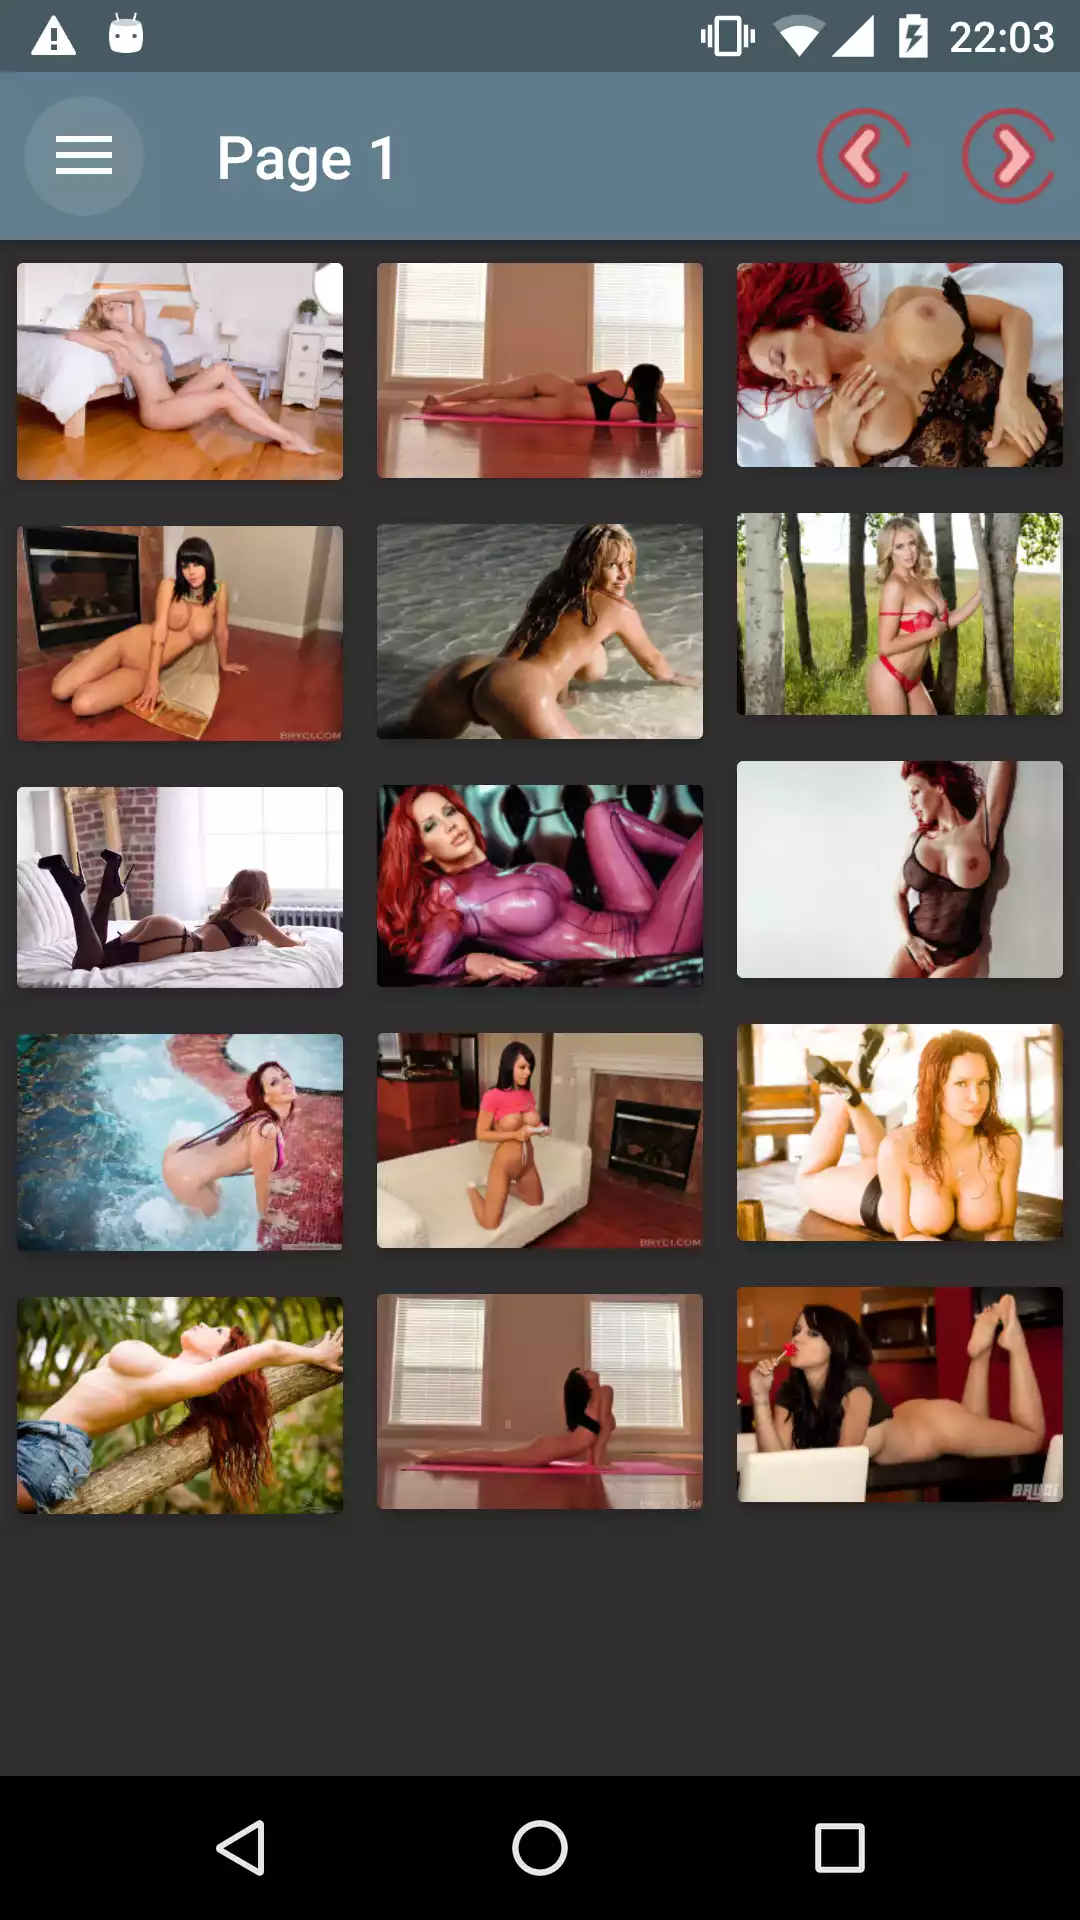 Hot Canadian Walls porn,henati,best,hot,pic,daily,photo,sexy,hentai,photos,pornstar,pictures,free,download,phone,apps,pics,app,bisexpics,wallpapers,for,apk